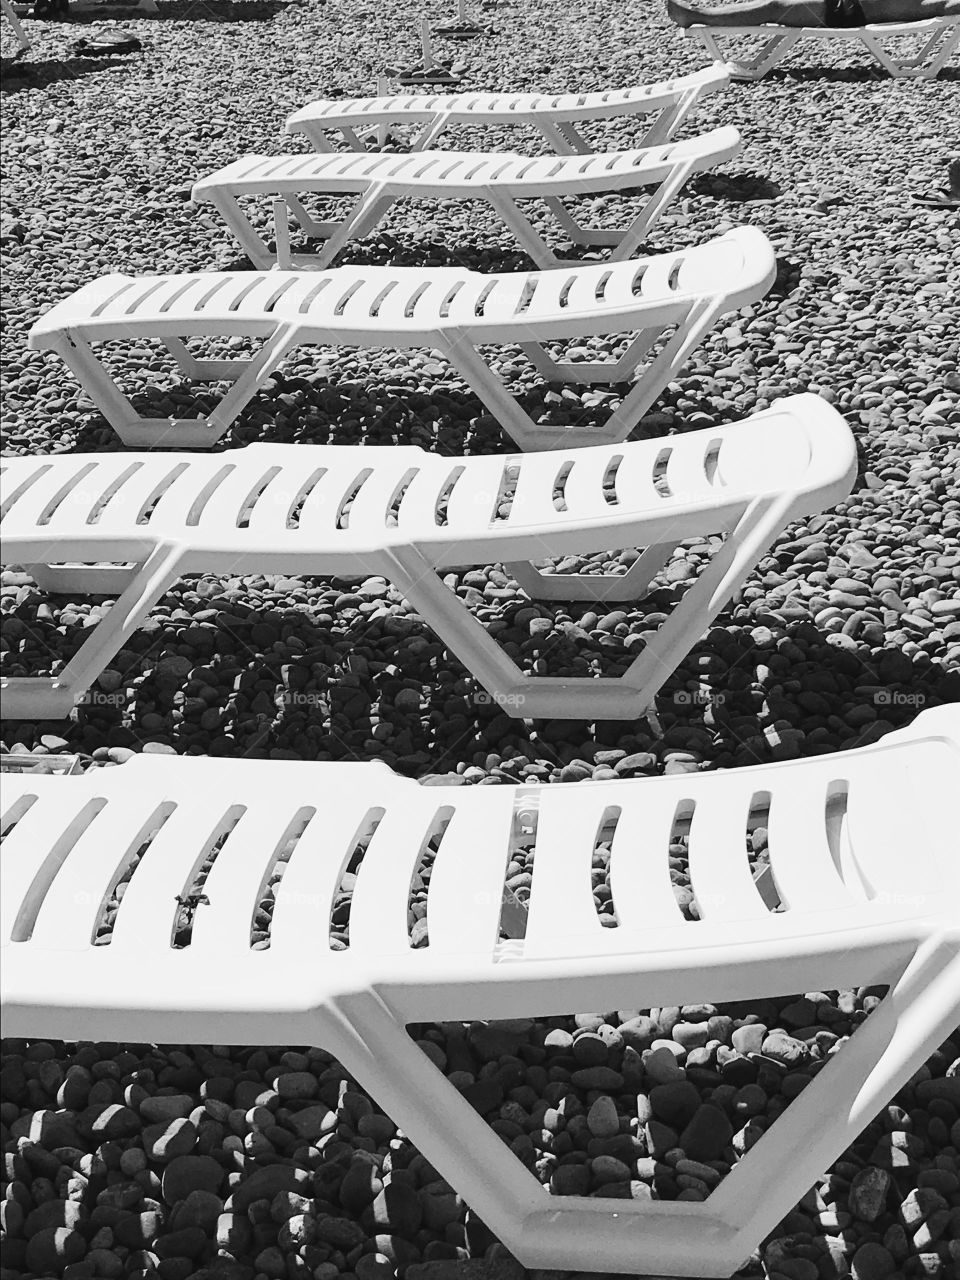 Beach, sand, stones, white chairs, row. Summer, sea, rest, vacation